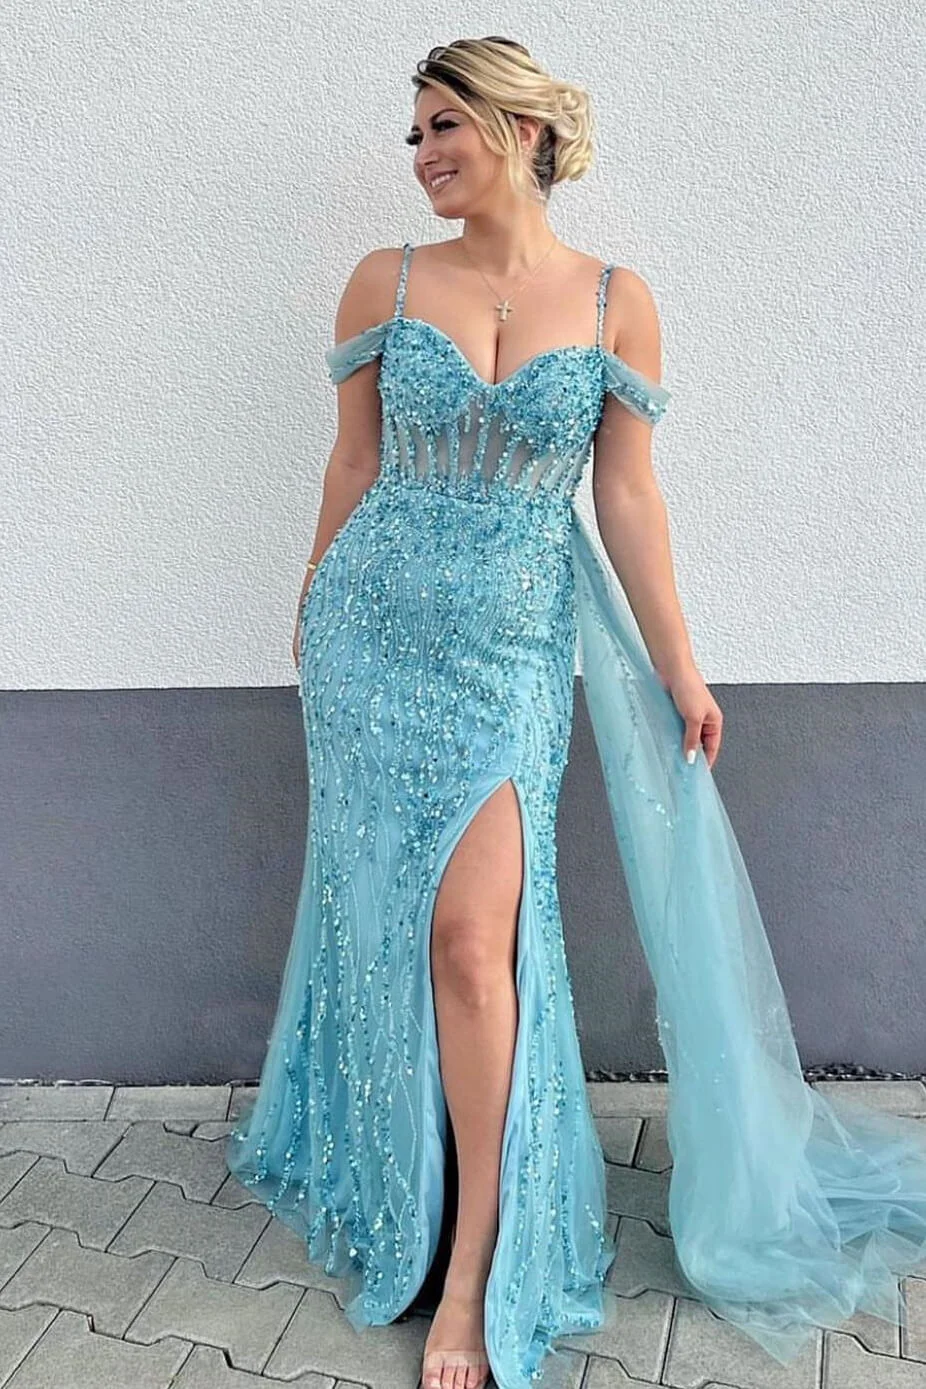 Classy Off-the-Shoulder Mermaid Blue Evening Dress With Appliques Beads Front Slit - lulusllly